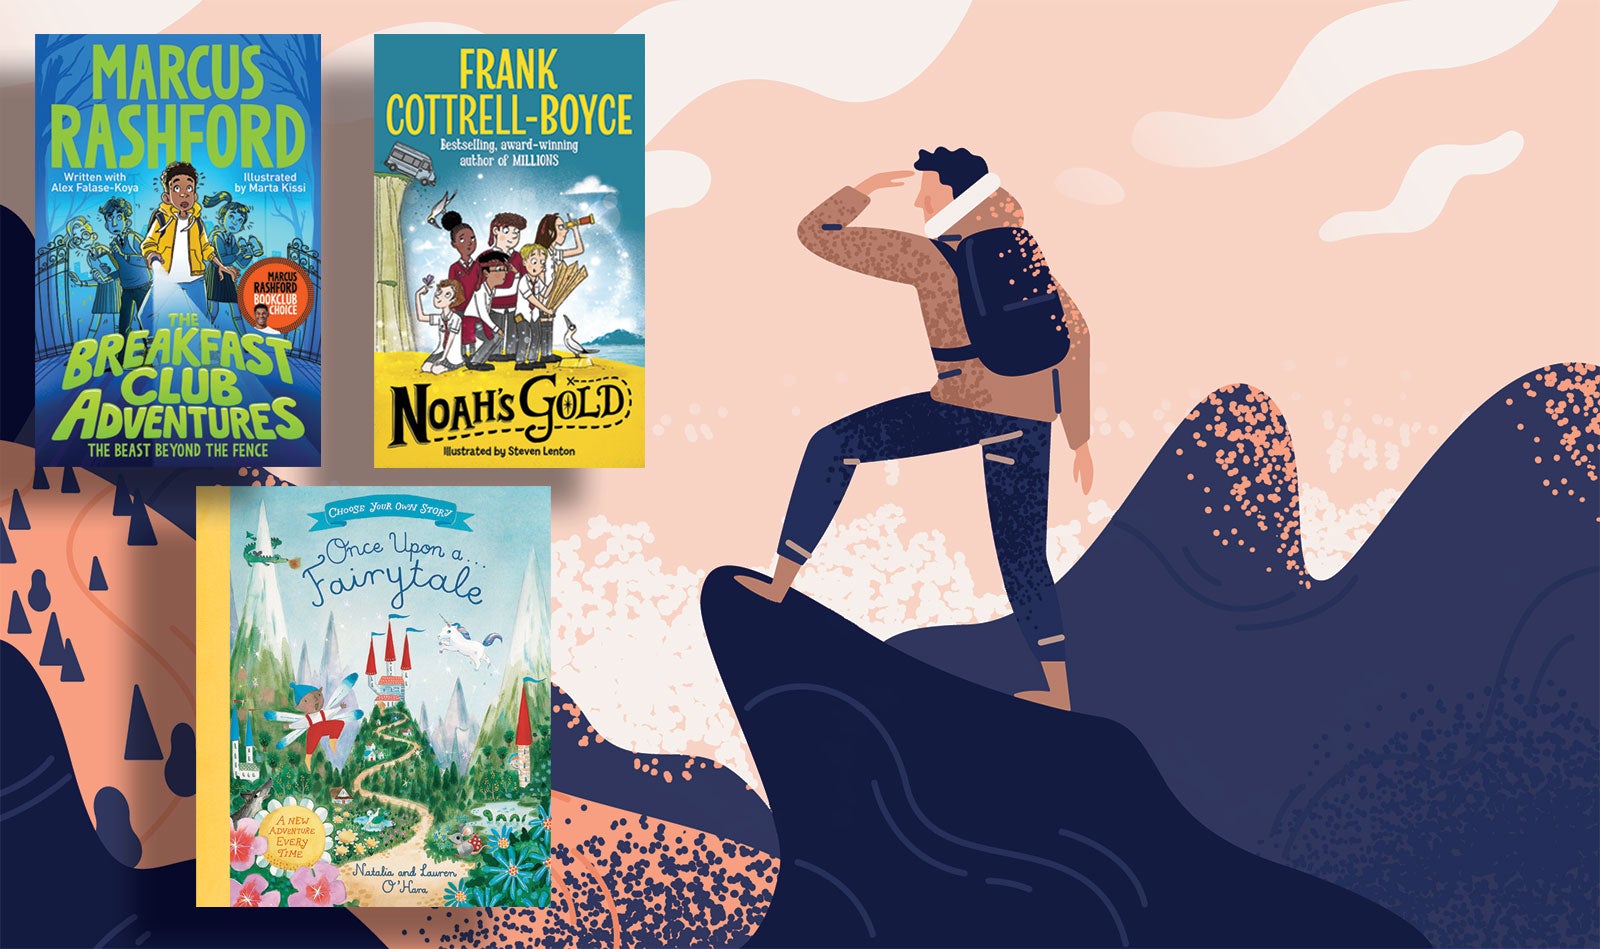 Illustration of a young man wearing a backpack, standing on a rock and looking out onto a mountain scene in the distance, with book covers of the Breakfast Club Adventures, Noah's Gold and Once Upon a Fairytale layered over the image